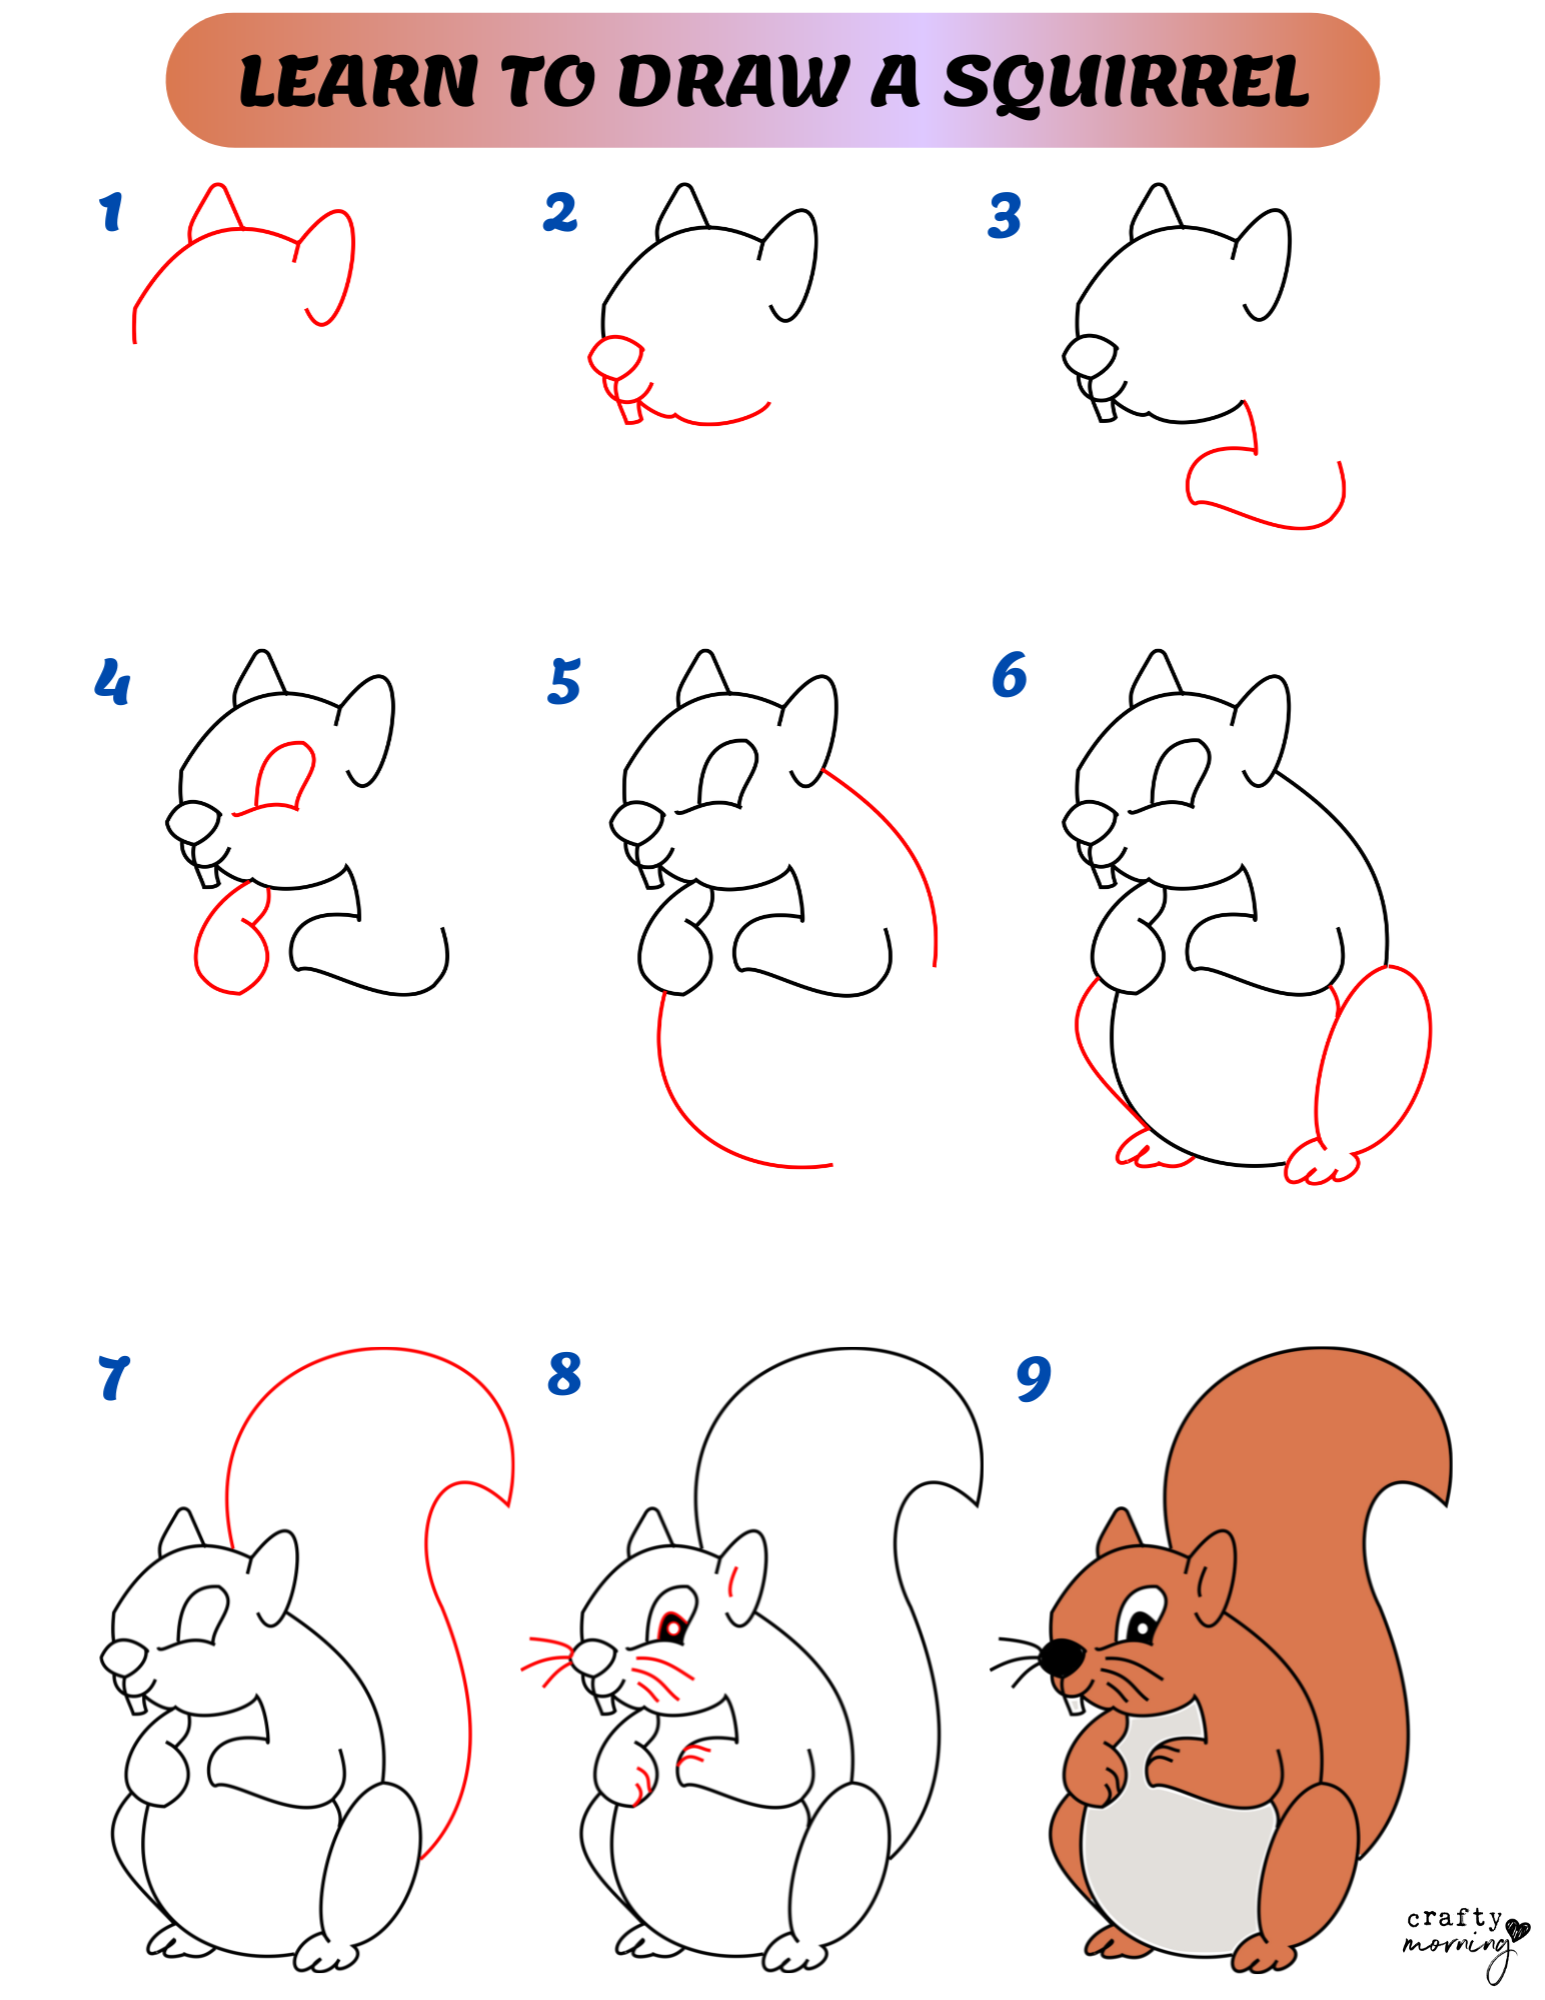 Watch How to Draw a Squirrel for Kids | Prime Video